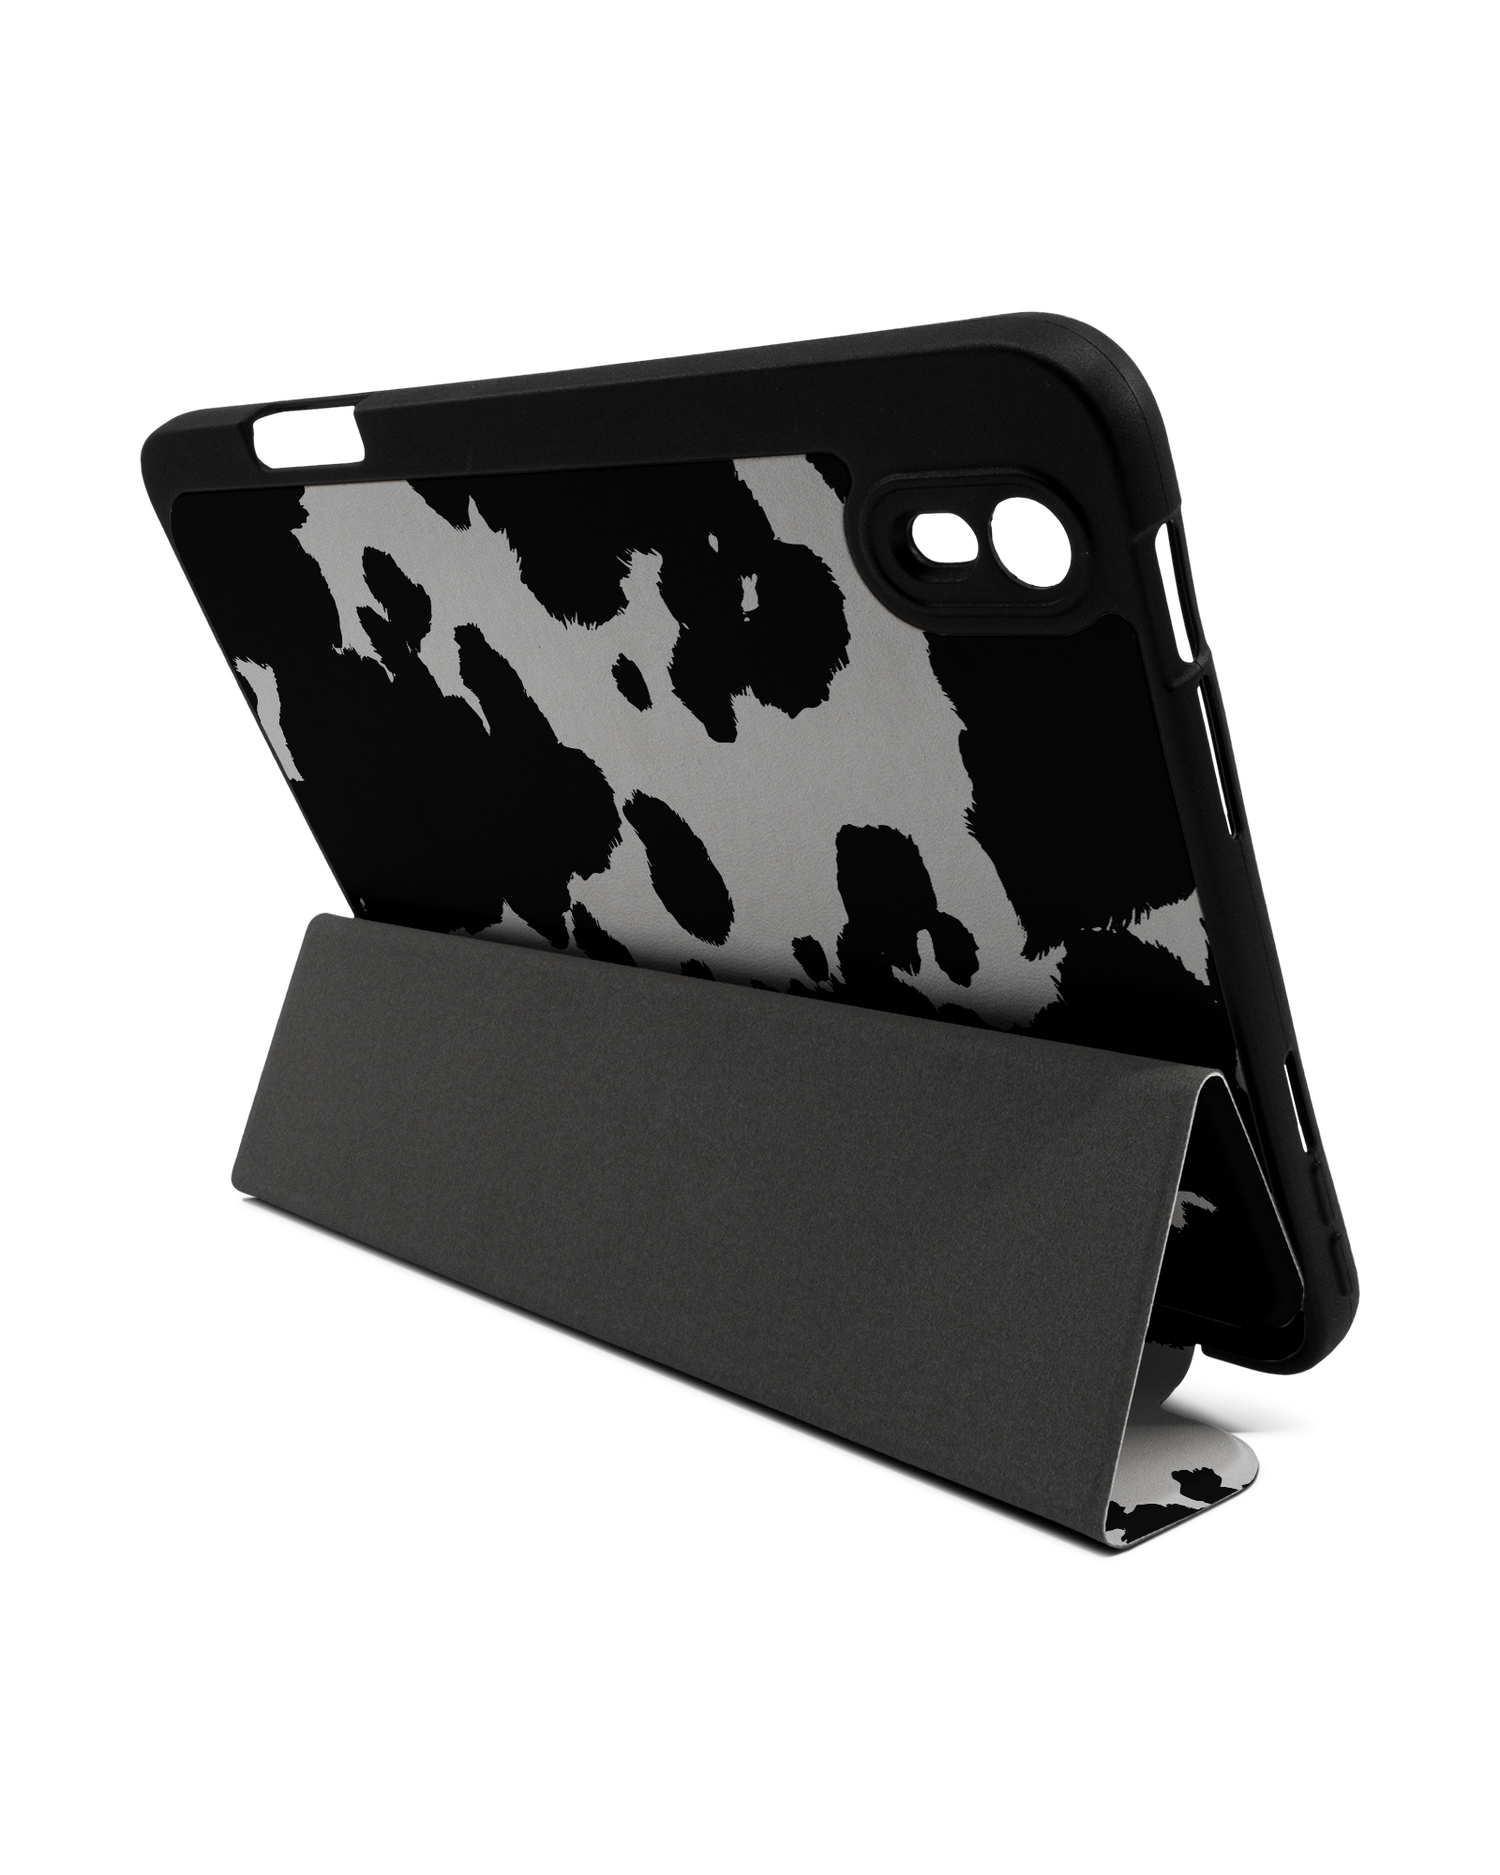 Cow Print iPad Case with Pencil Holder Apple iPad mini 6 (2021): Set up in landscape format (back view)